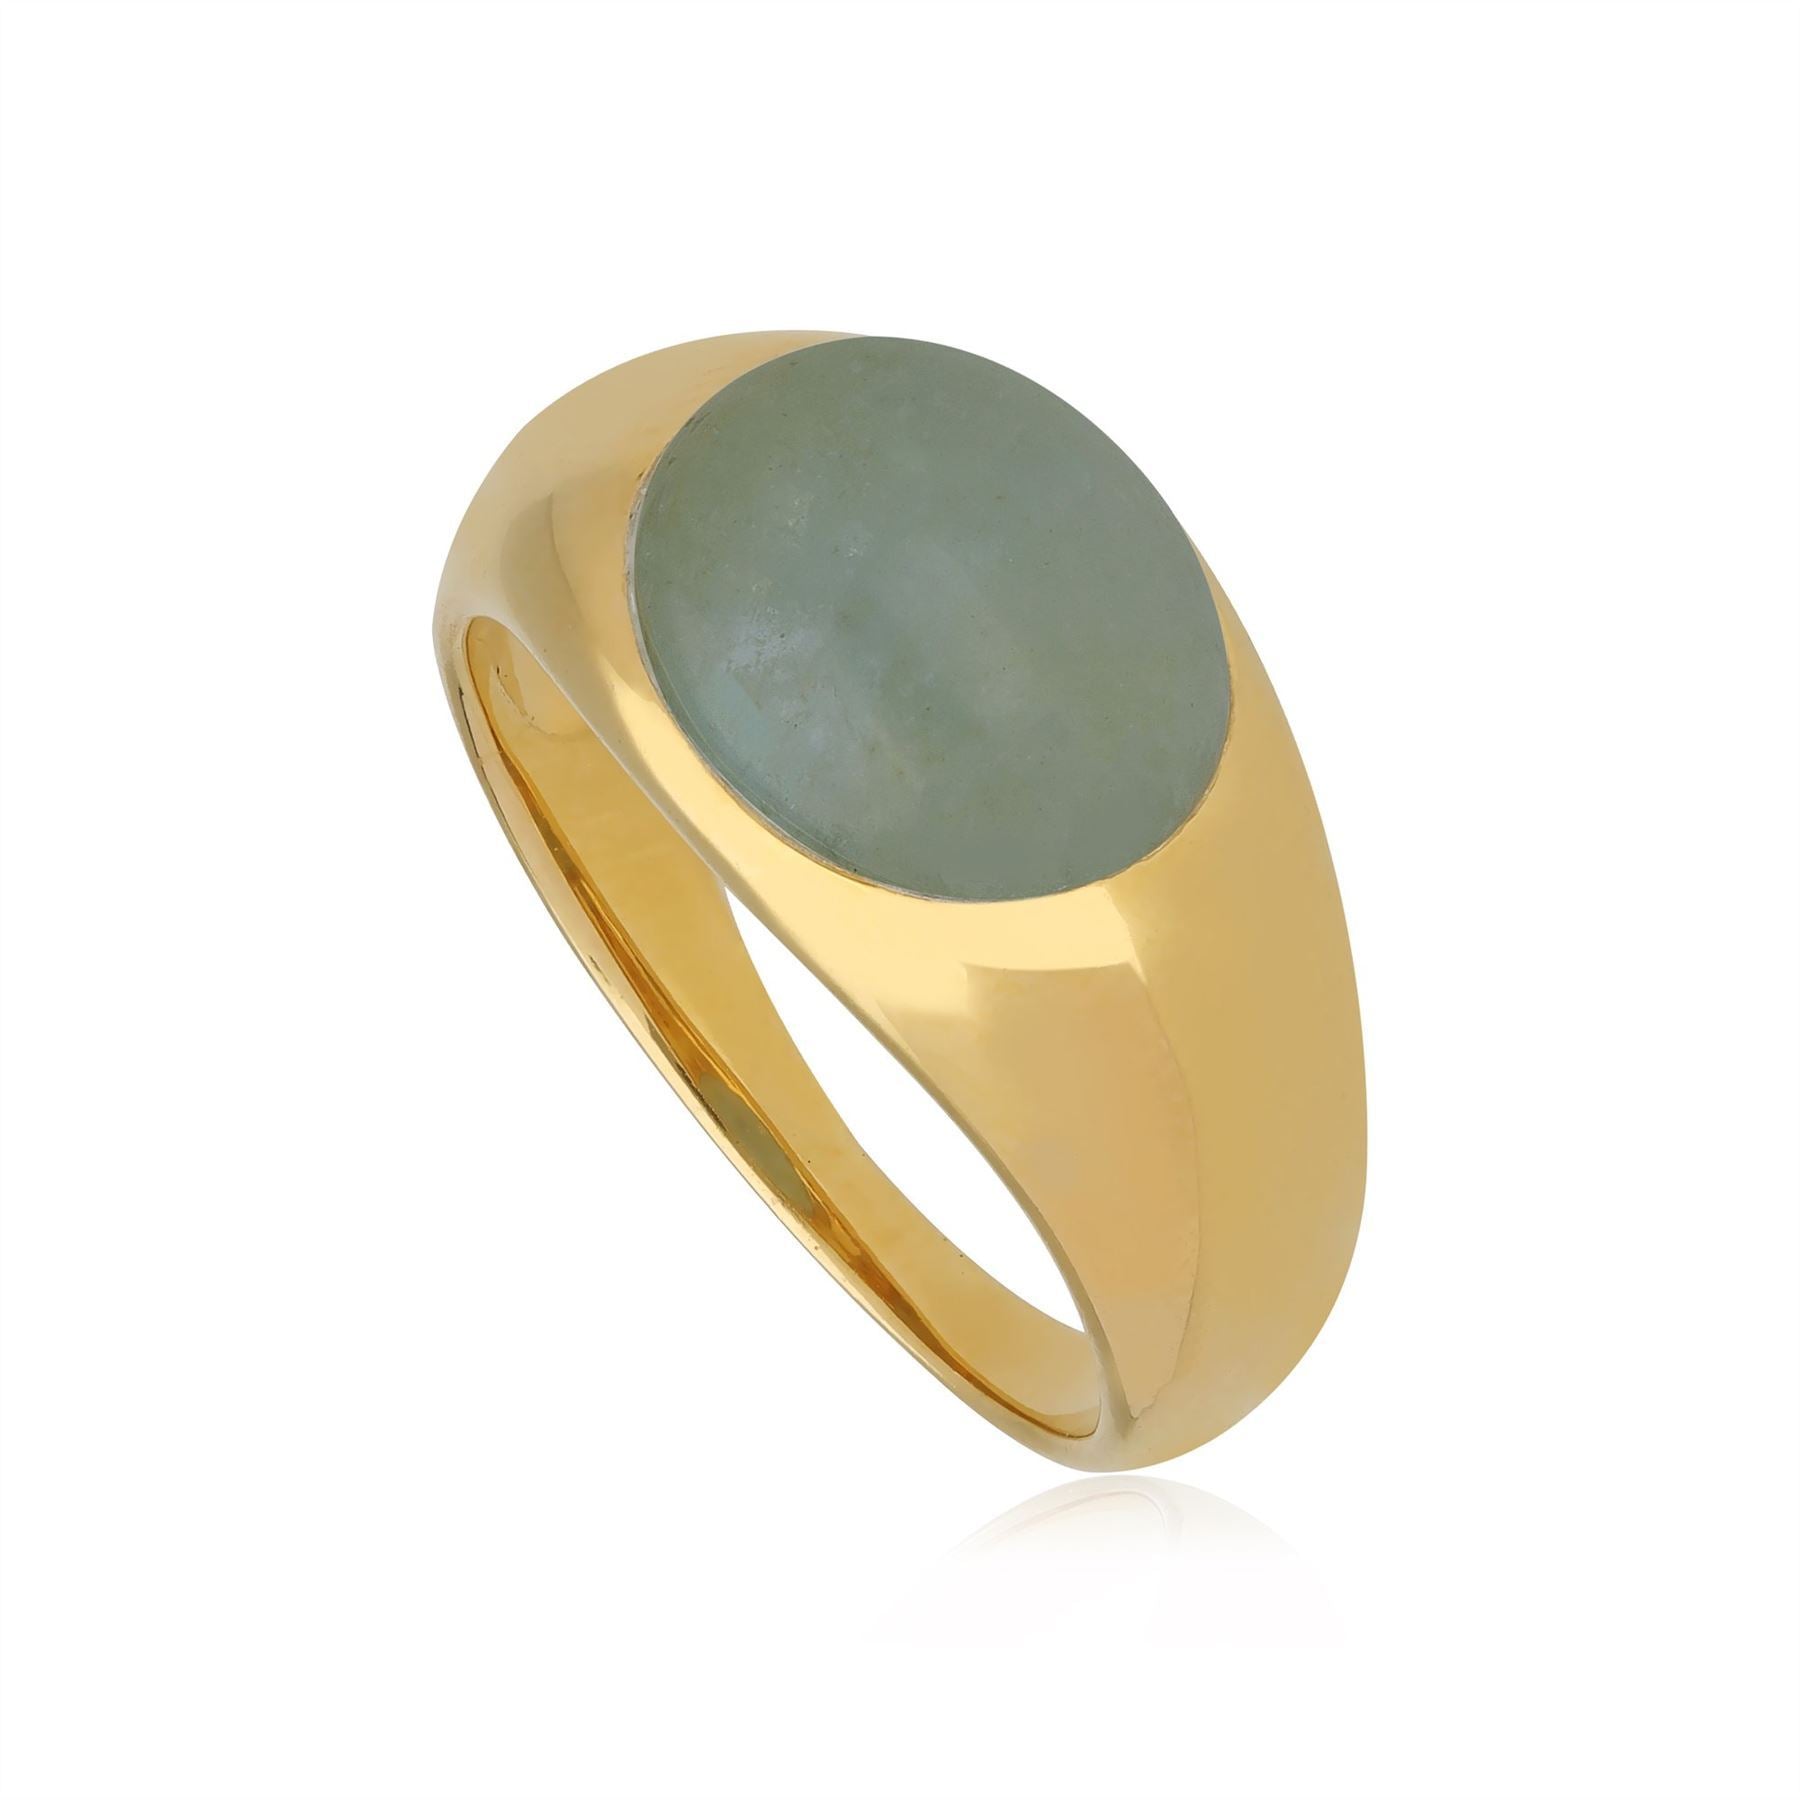 Kosmos Emerald Cocktail Ring in Gold Plated 925 Sterling Silver